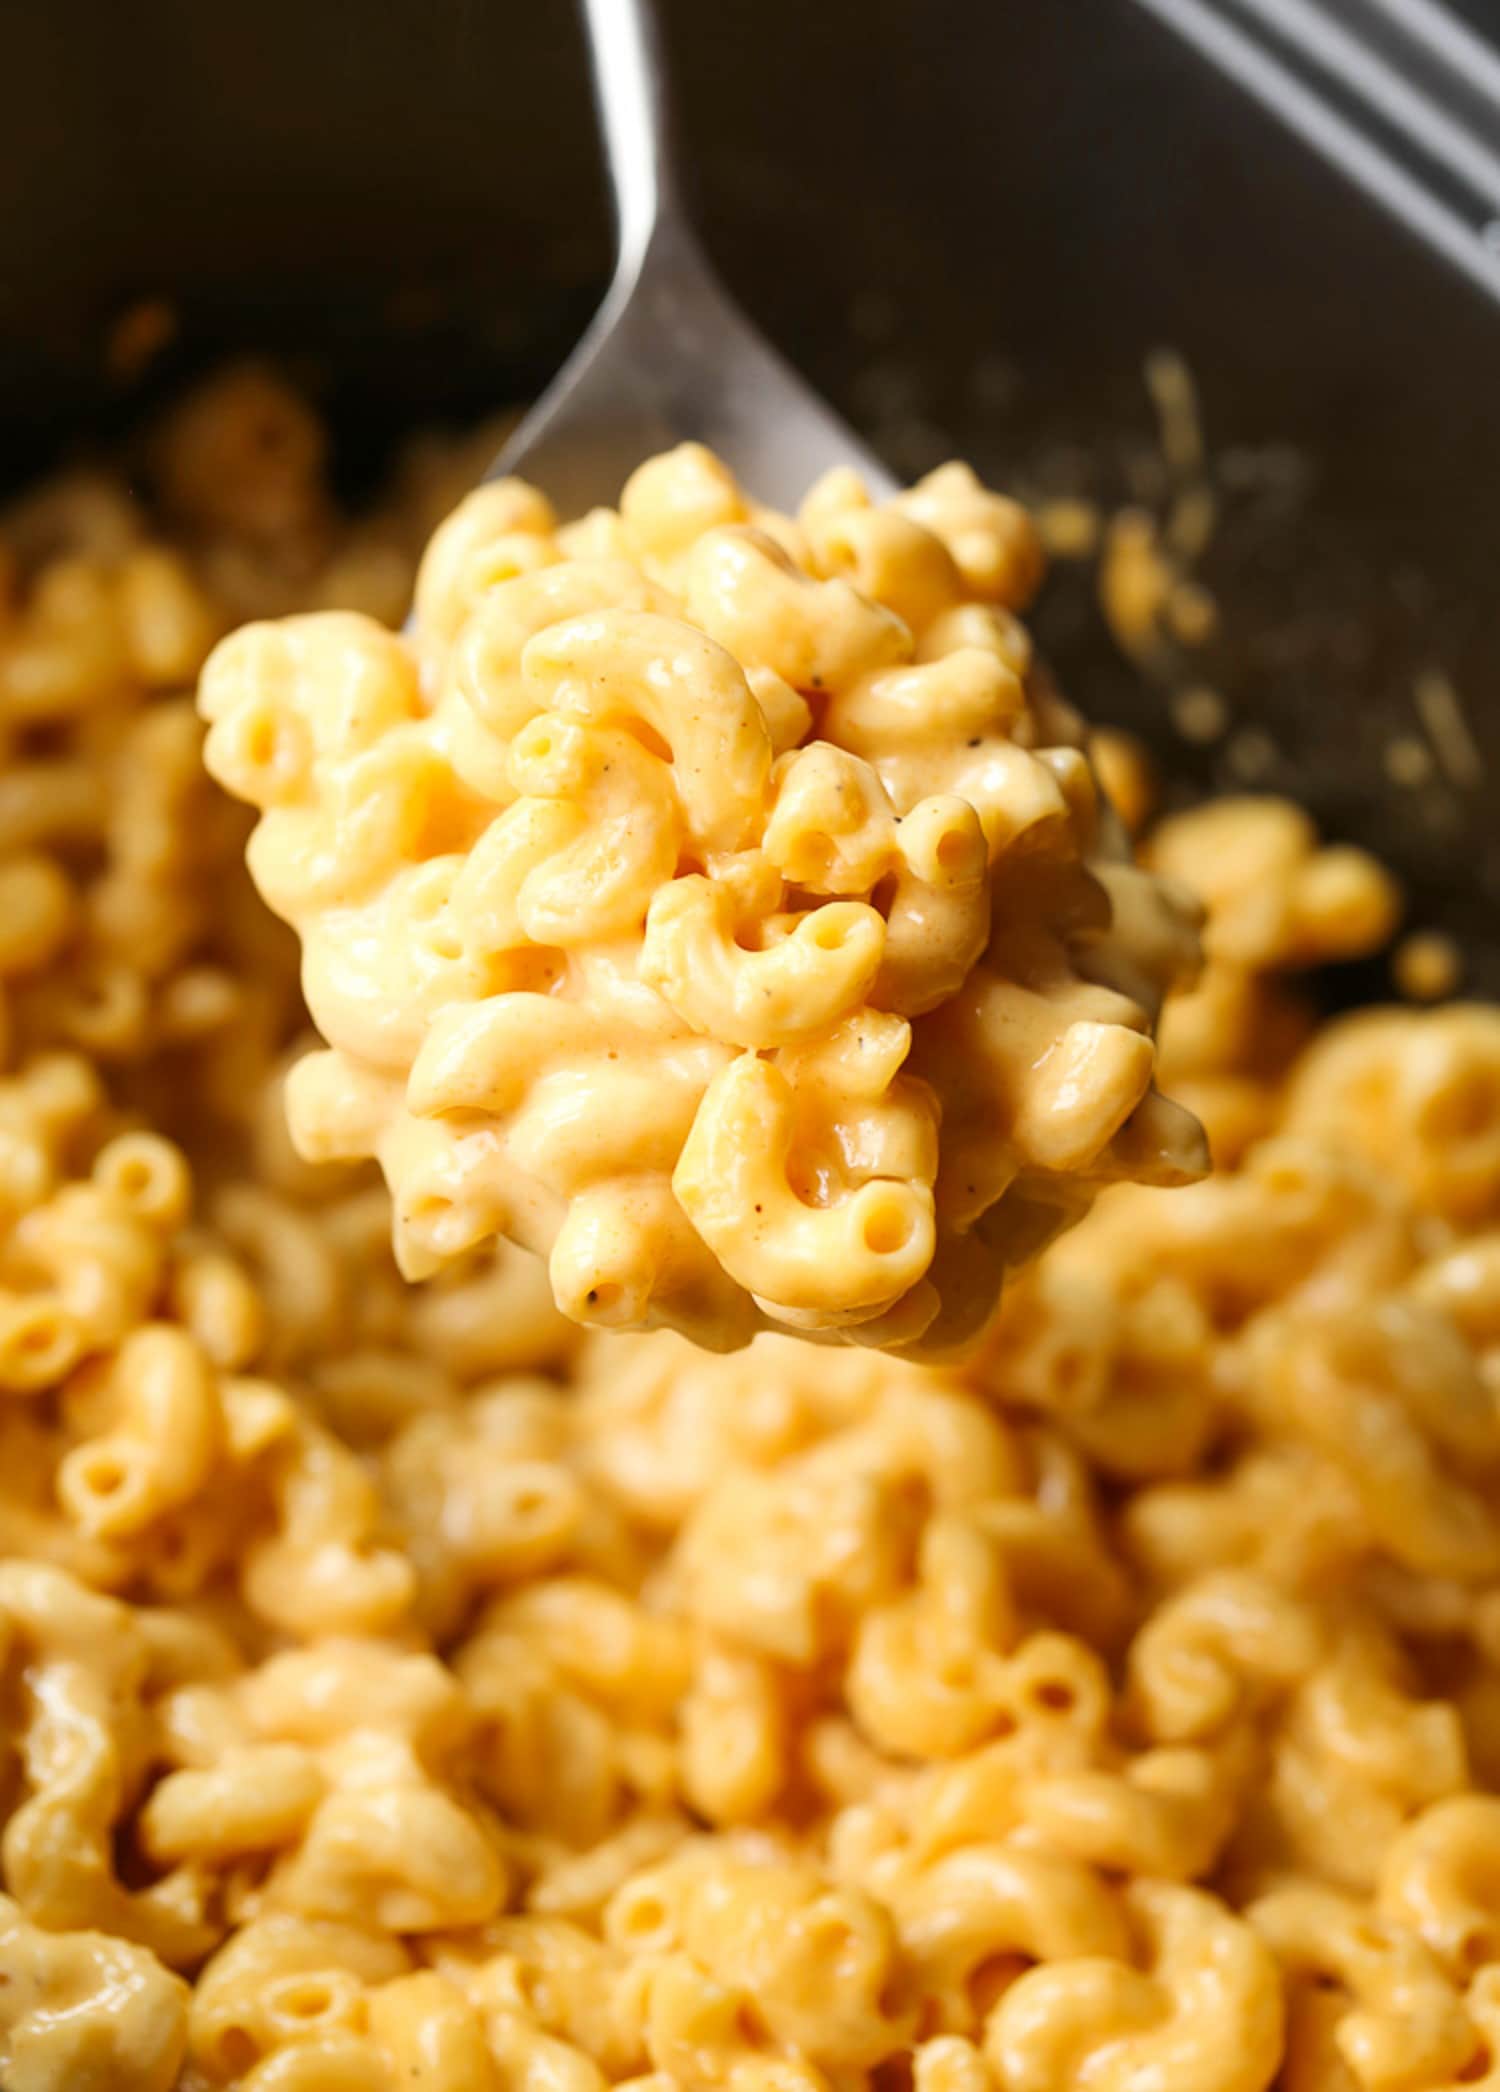 A spoonful of macaroni cheese out of a slow cooker